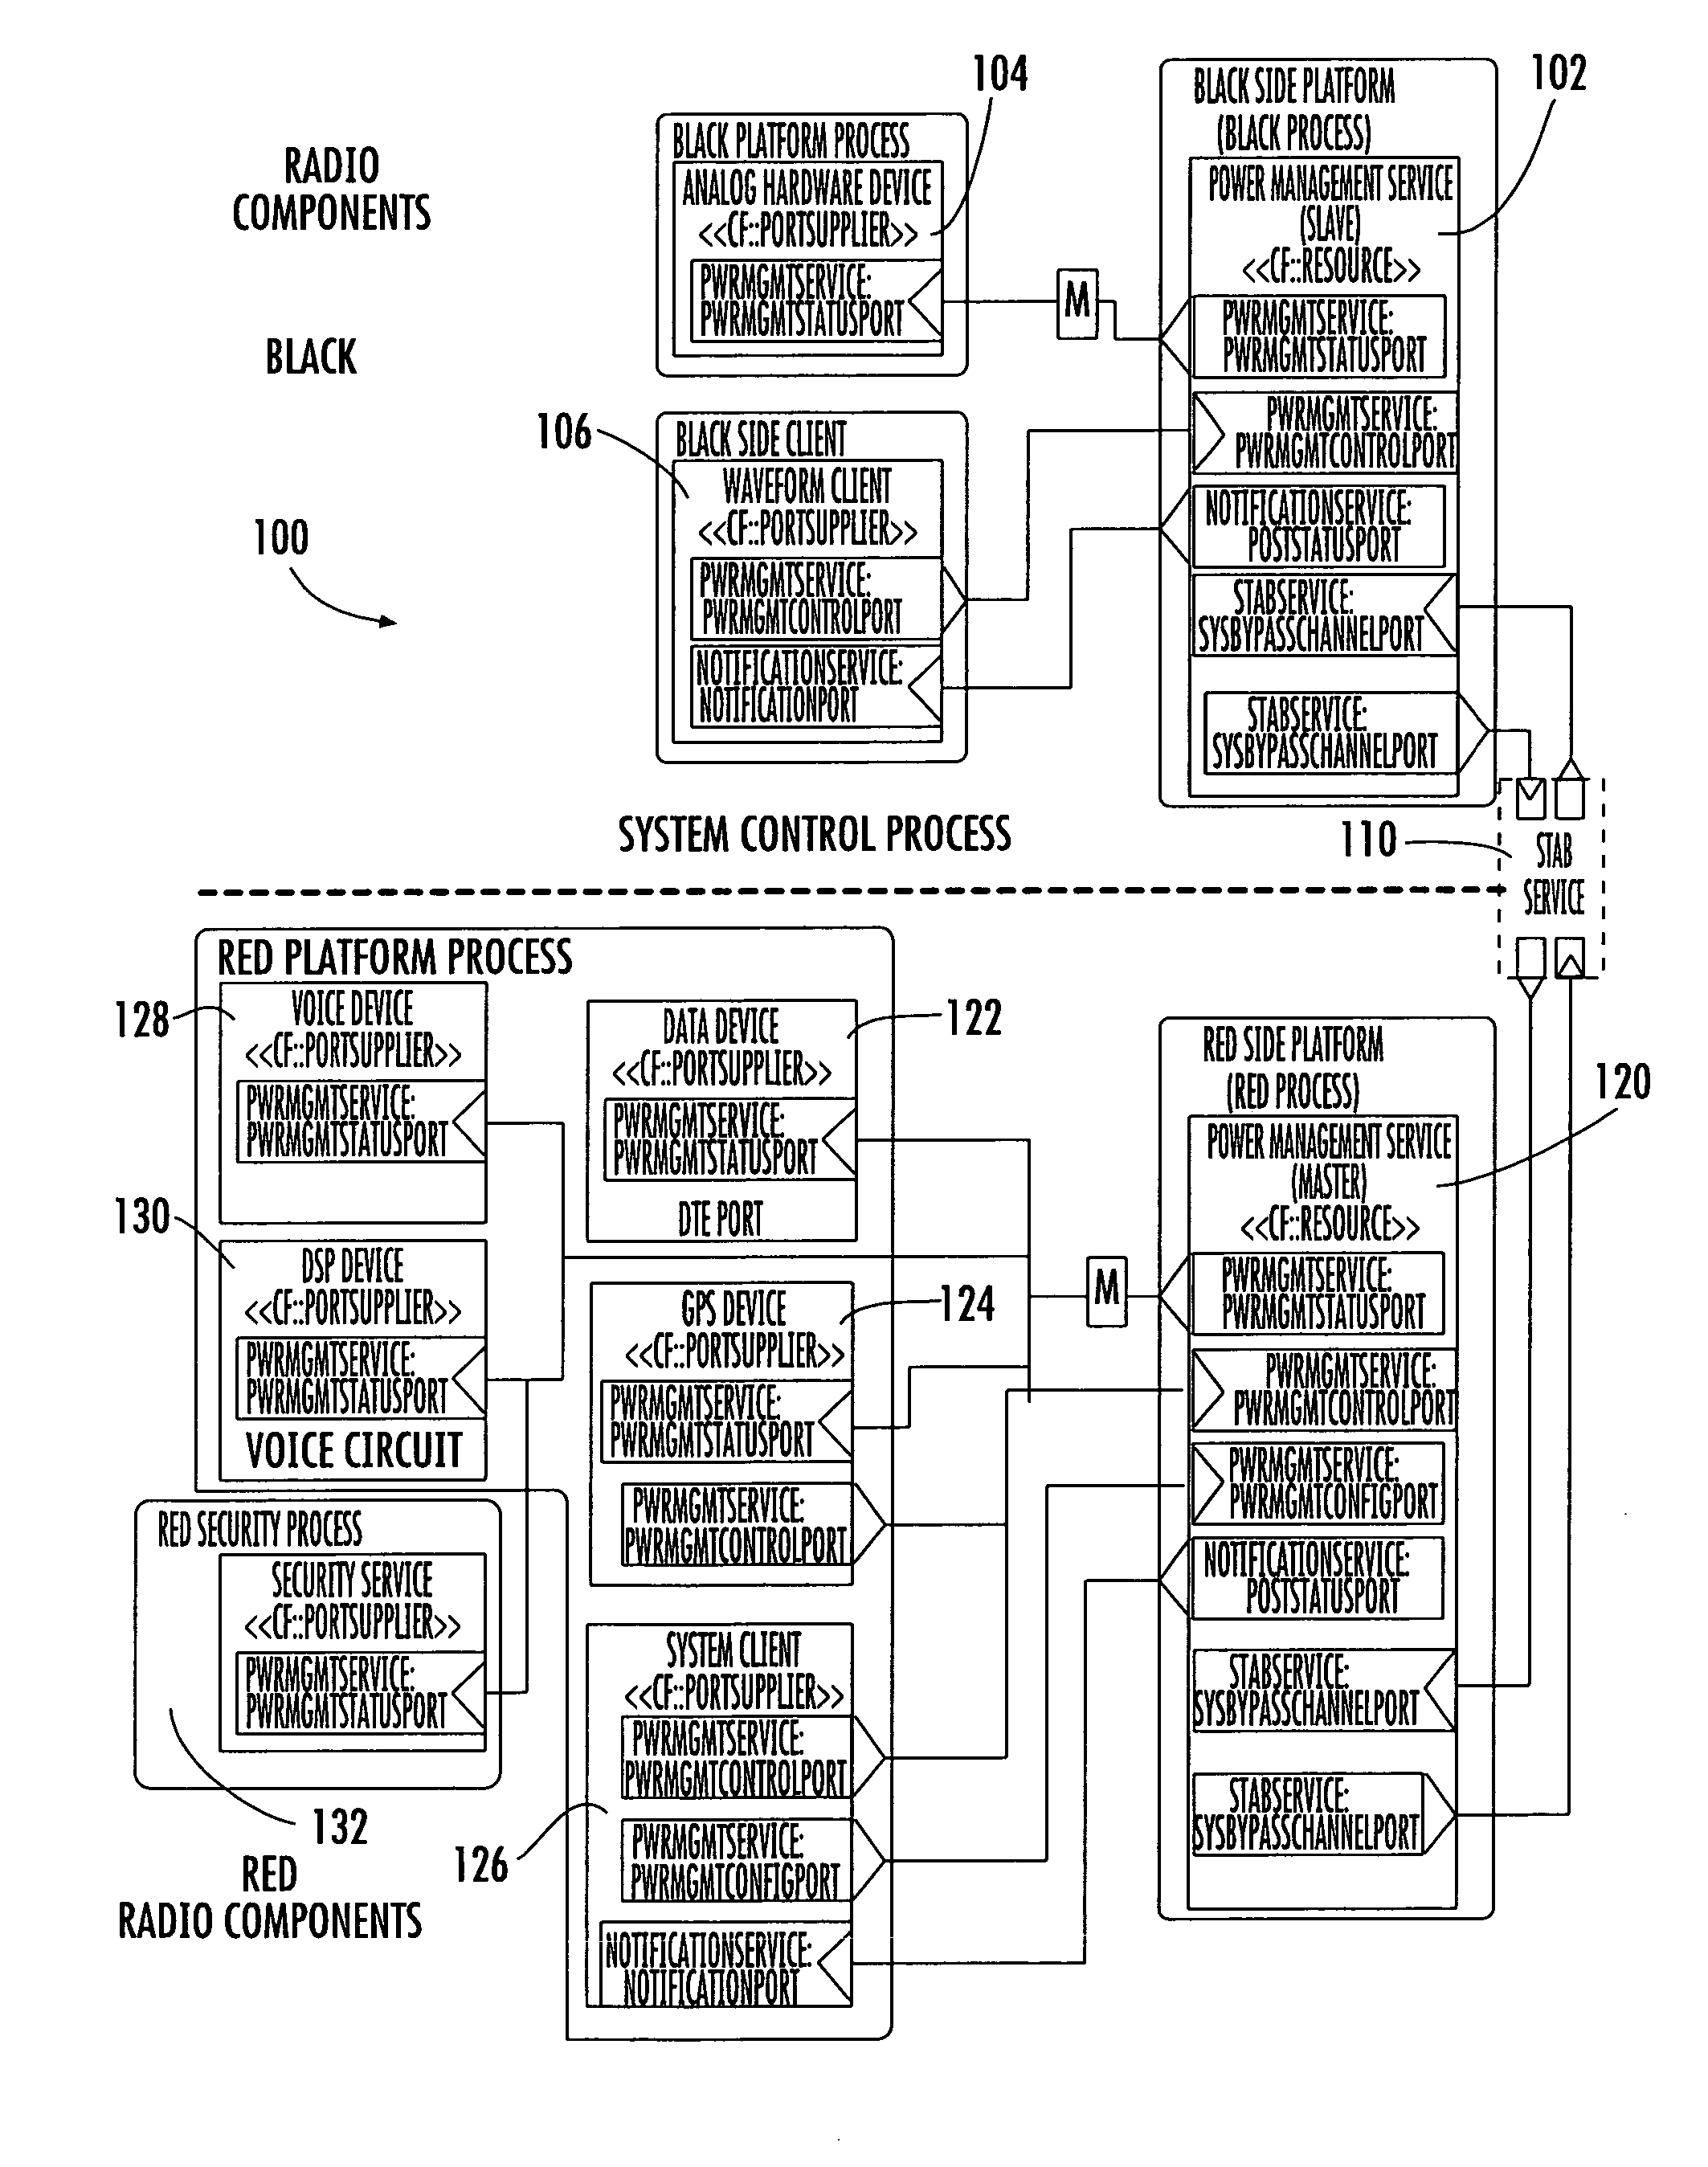 Power management system for SCA based software defined radio and related method